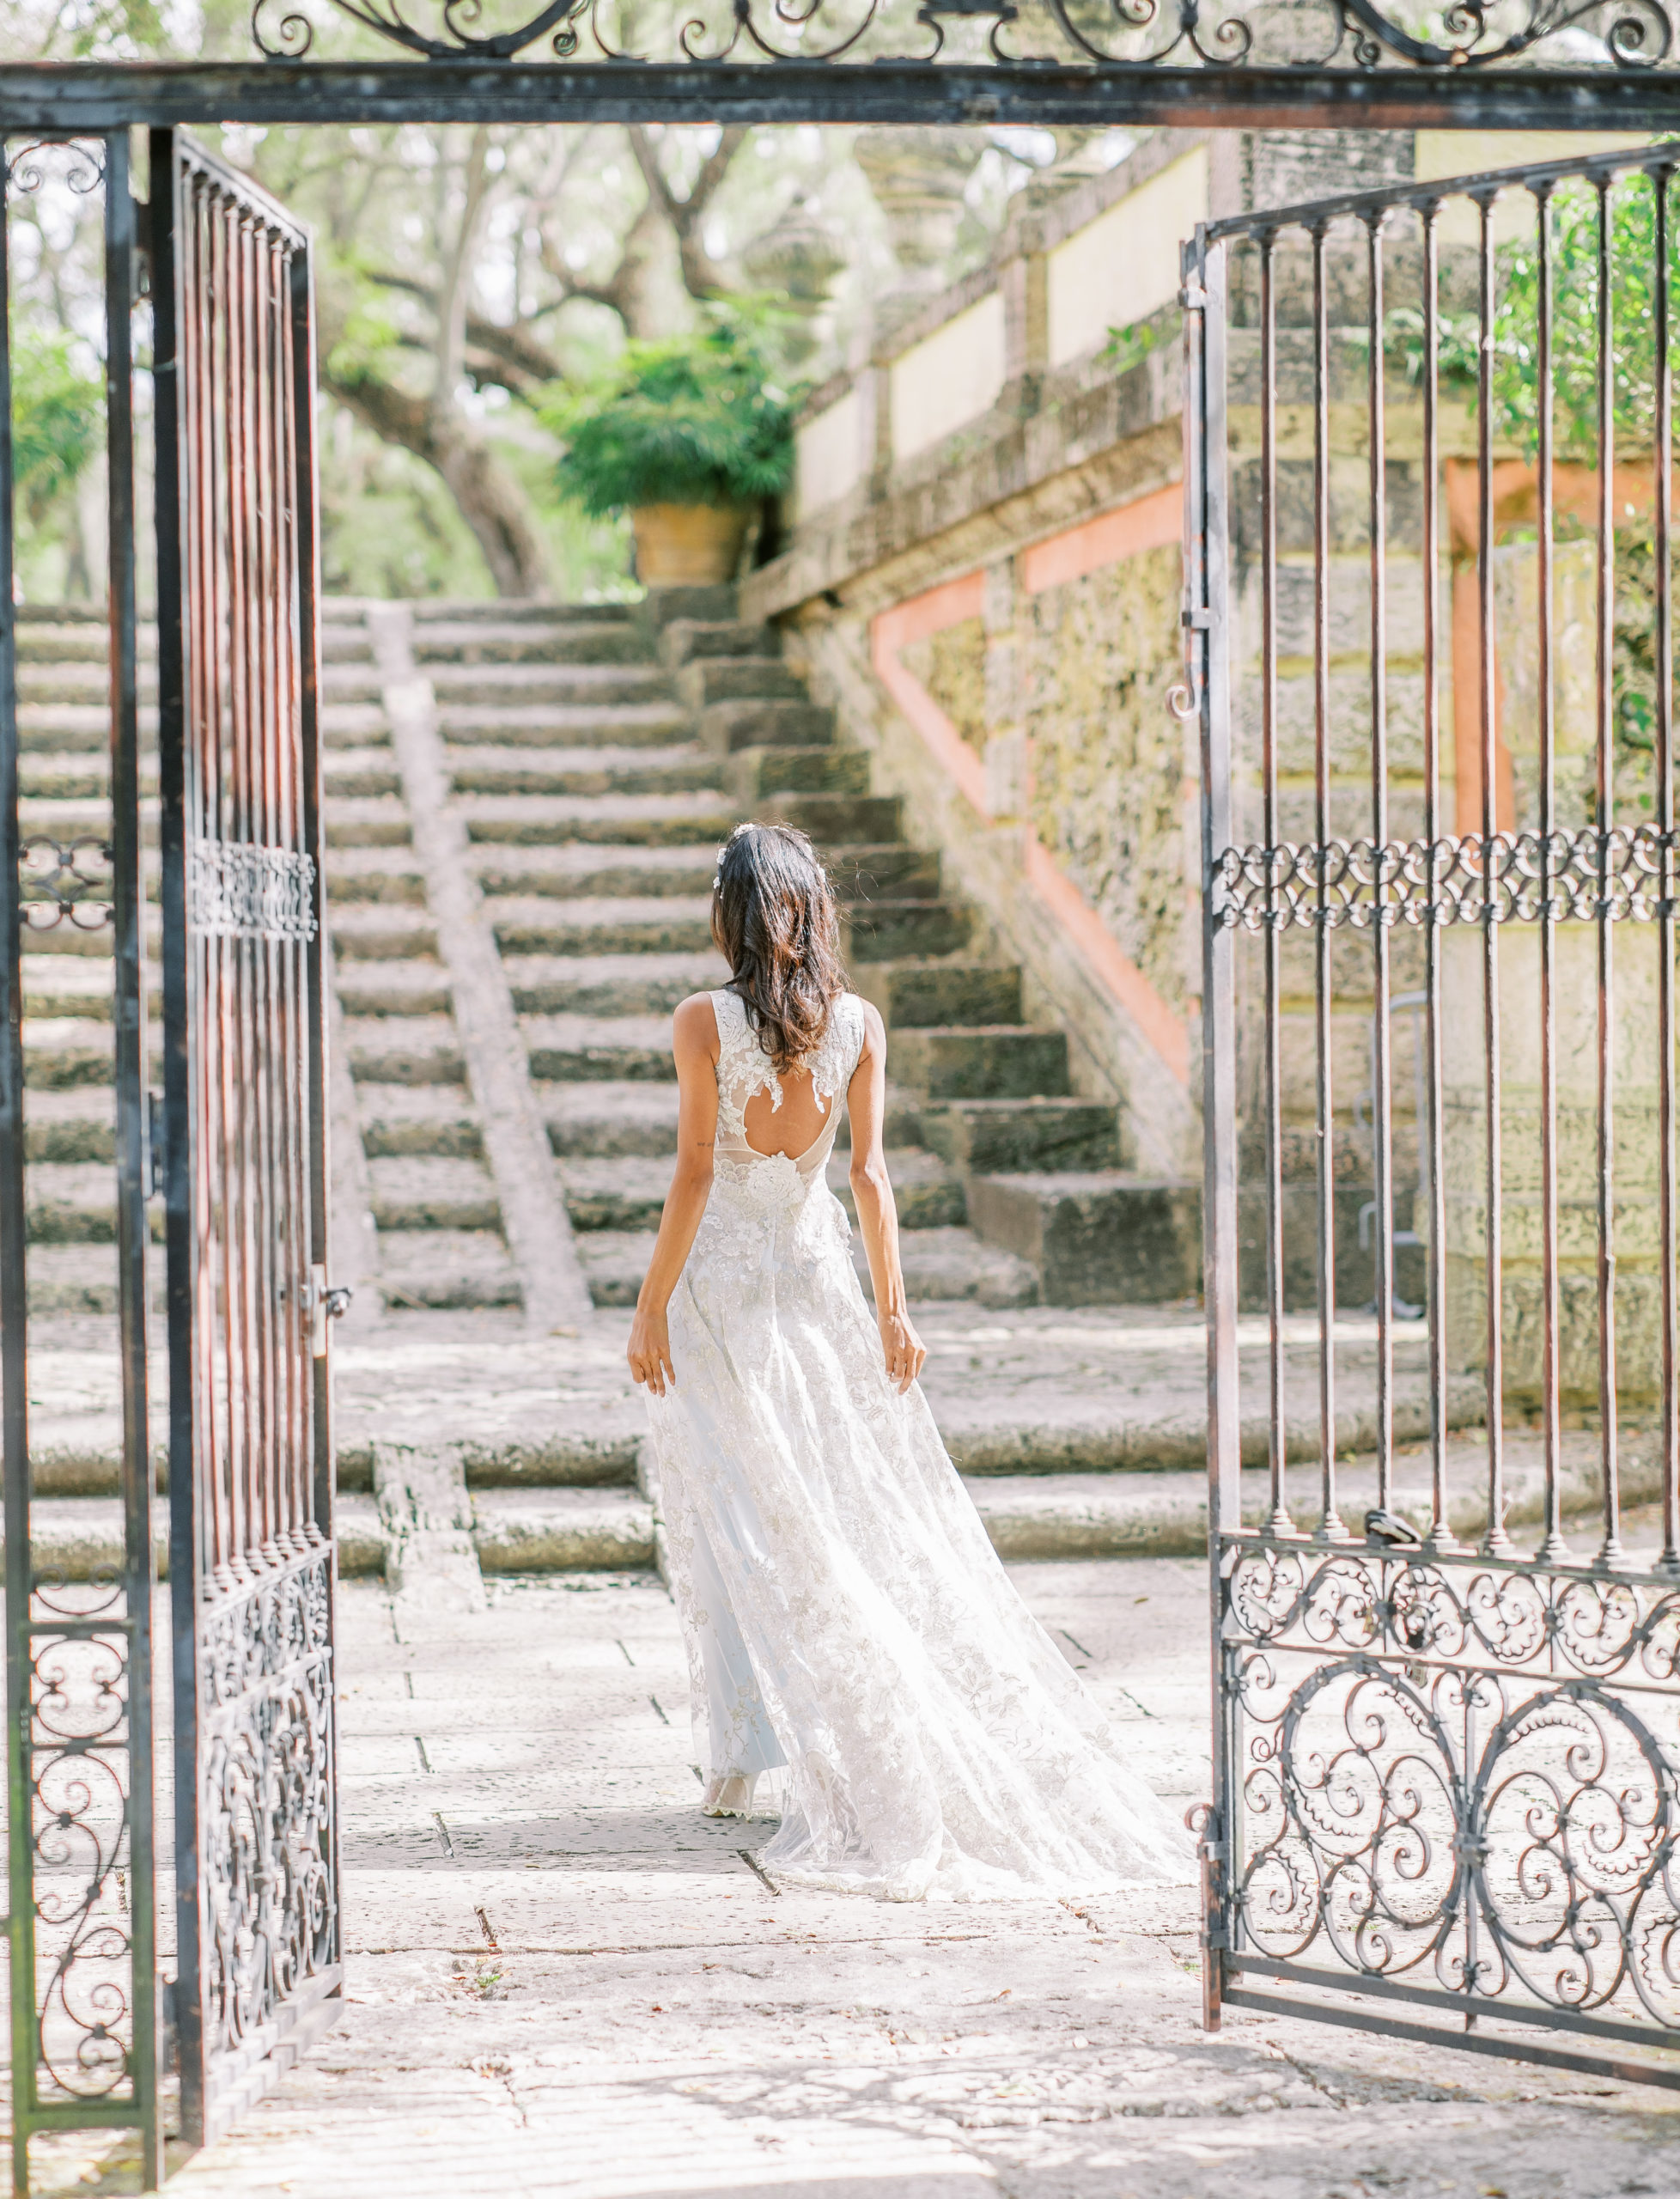 bride in couture dress walks through iron gate towards stone steps